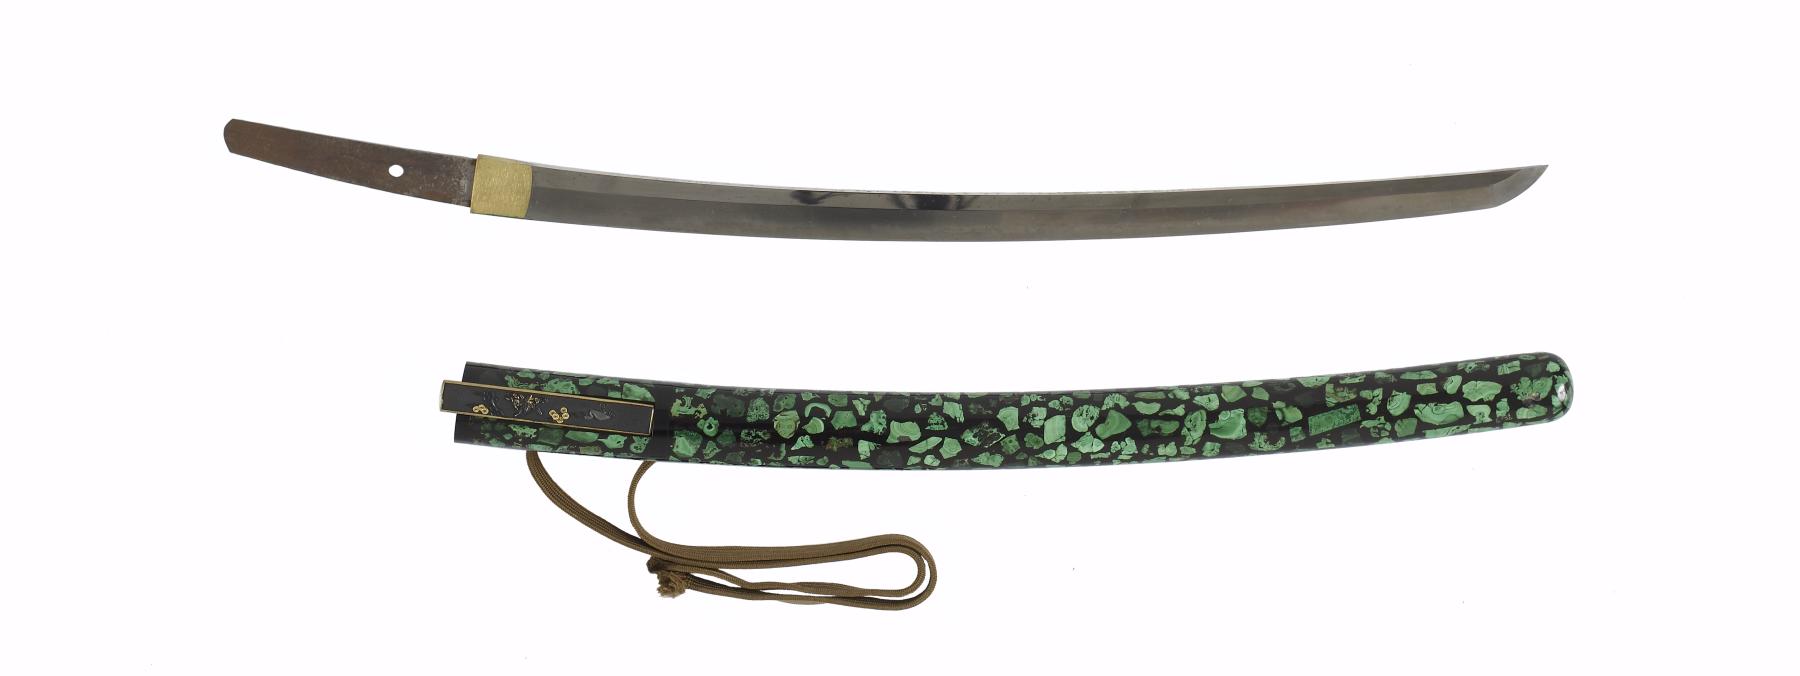 Image for Short sword (wakizashi) with black lacquer saya with malachite inlay (includes 51.1252.1-51.1252.4)